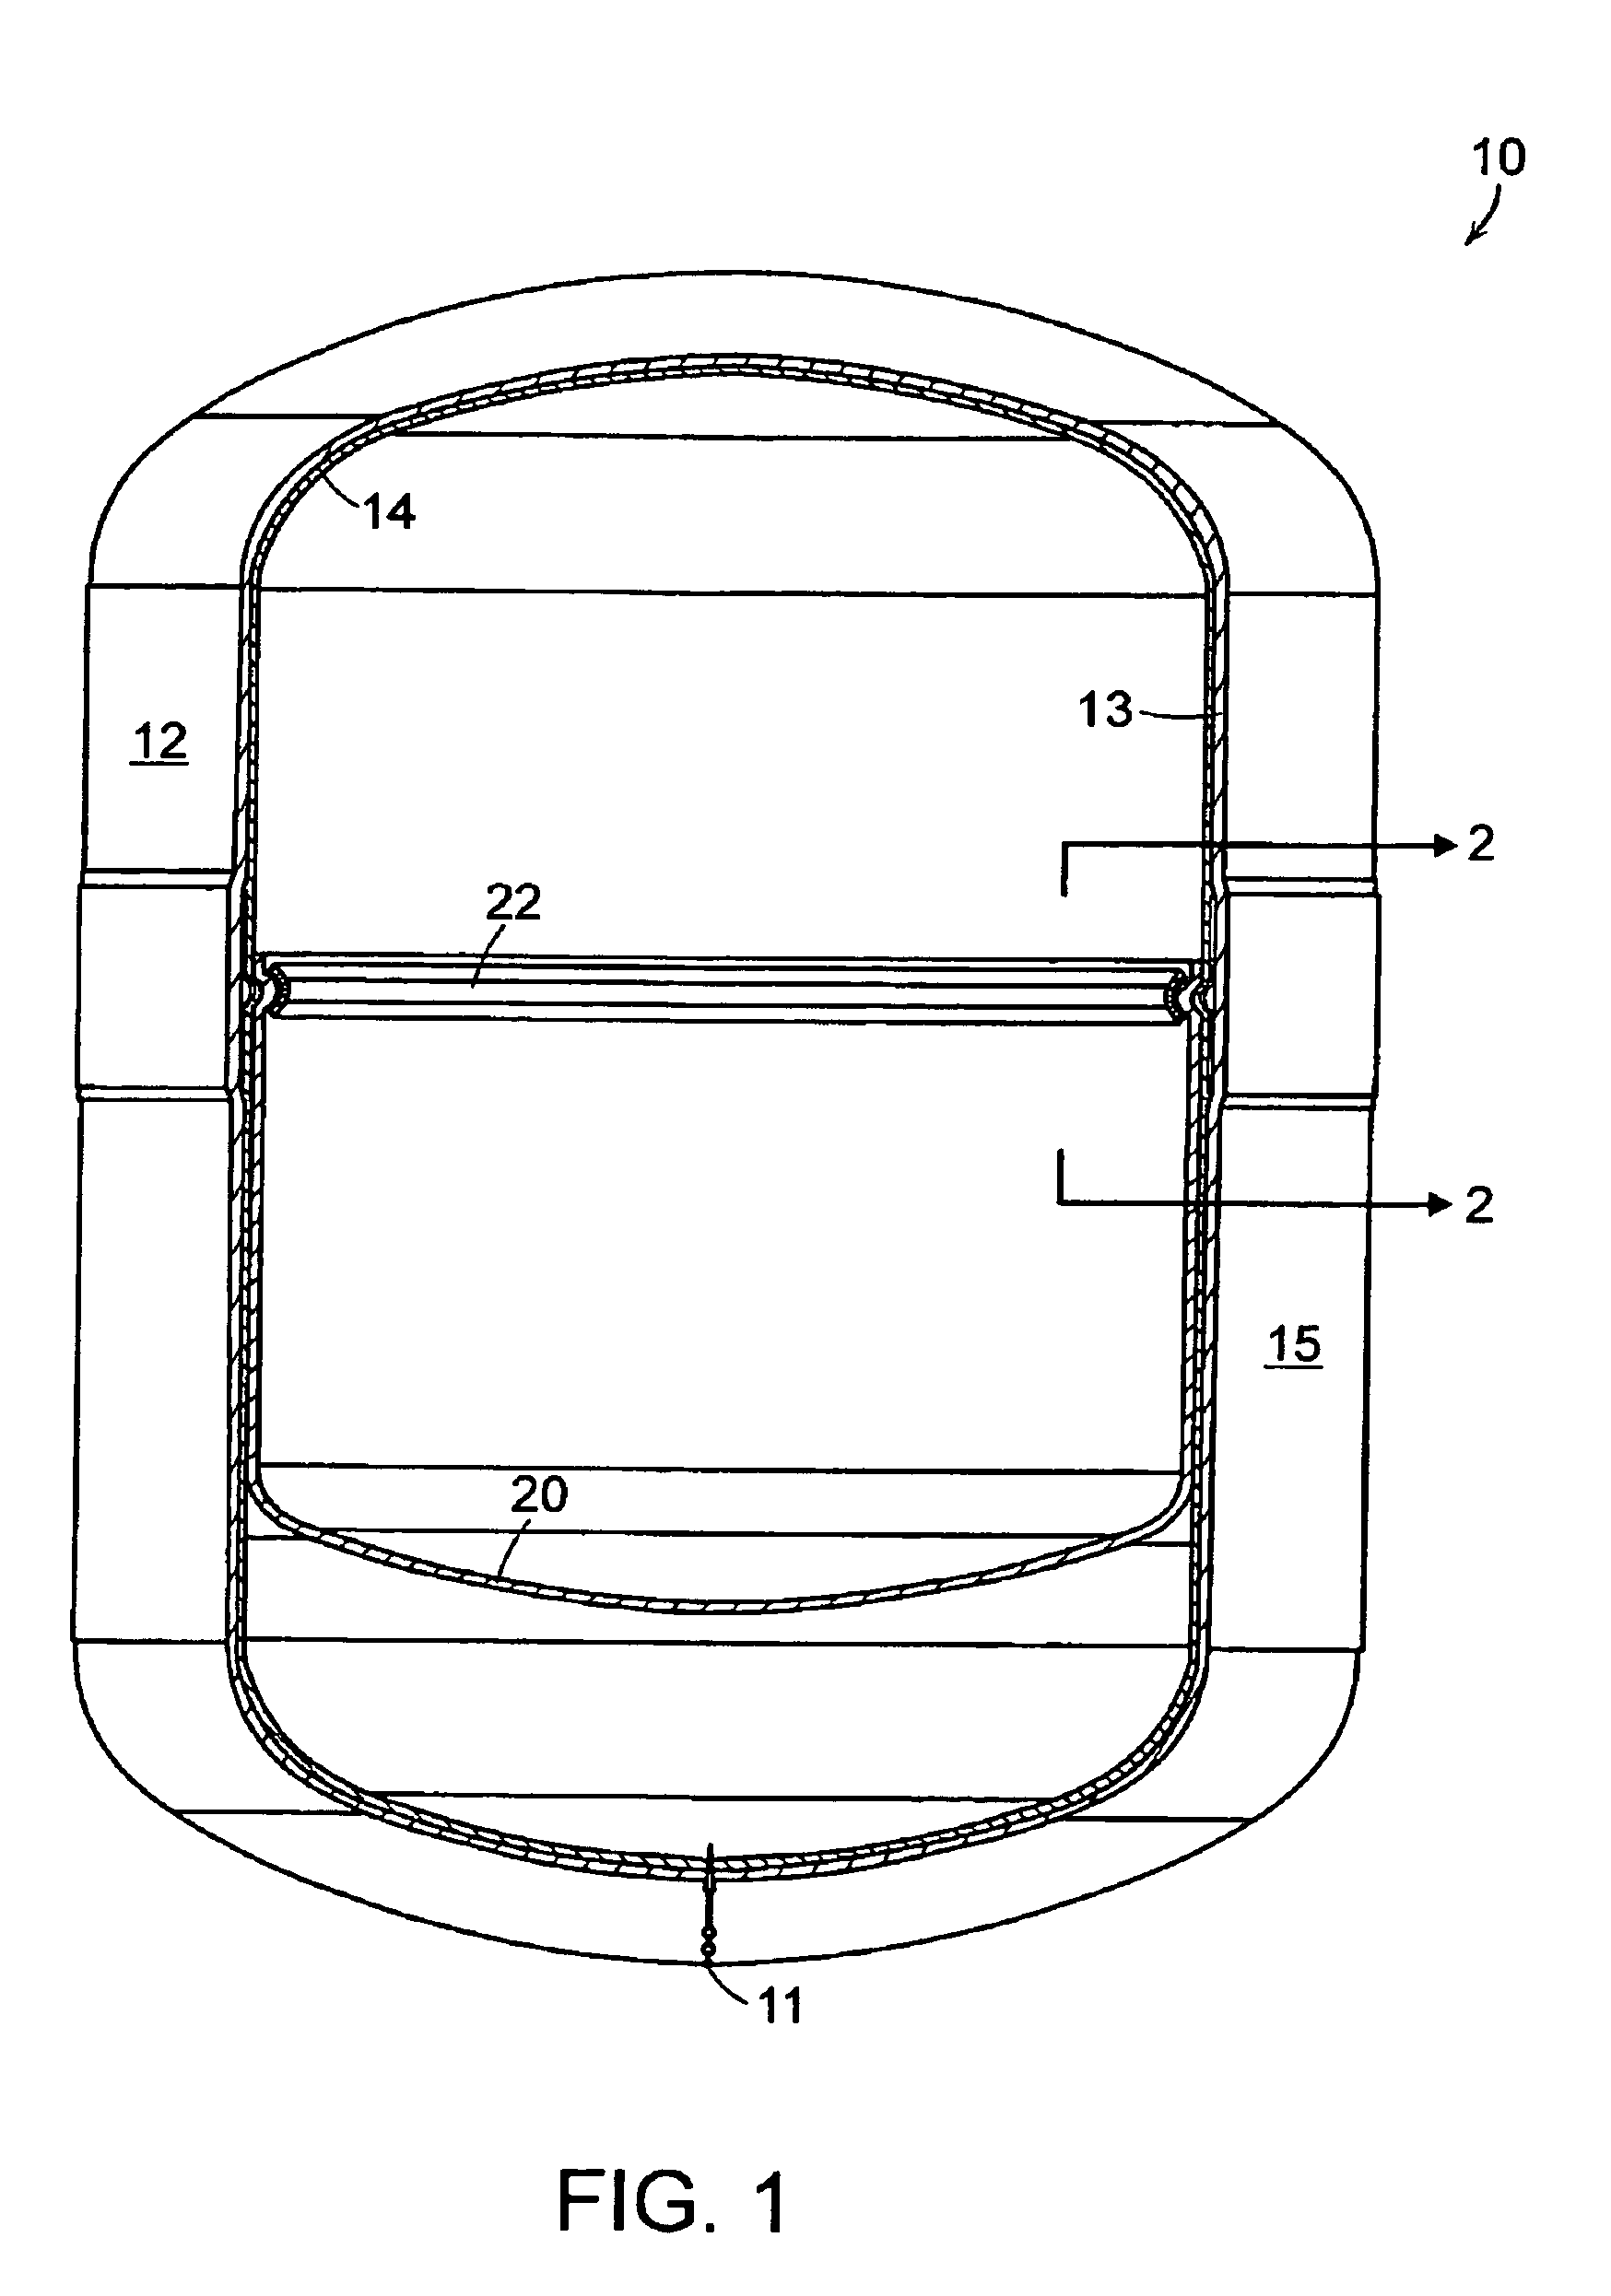 Non-metallic expansion tank with internal diaphragm and clamping device for same